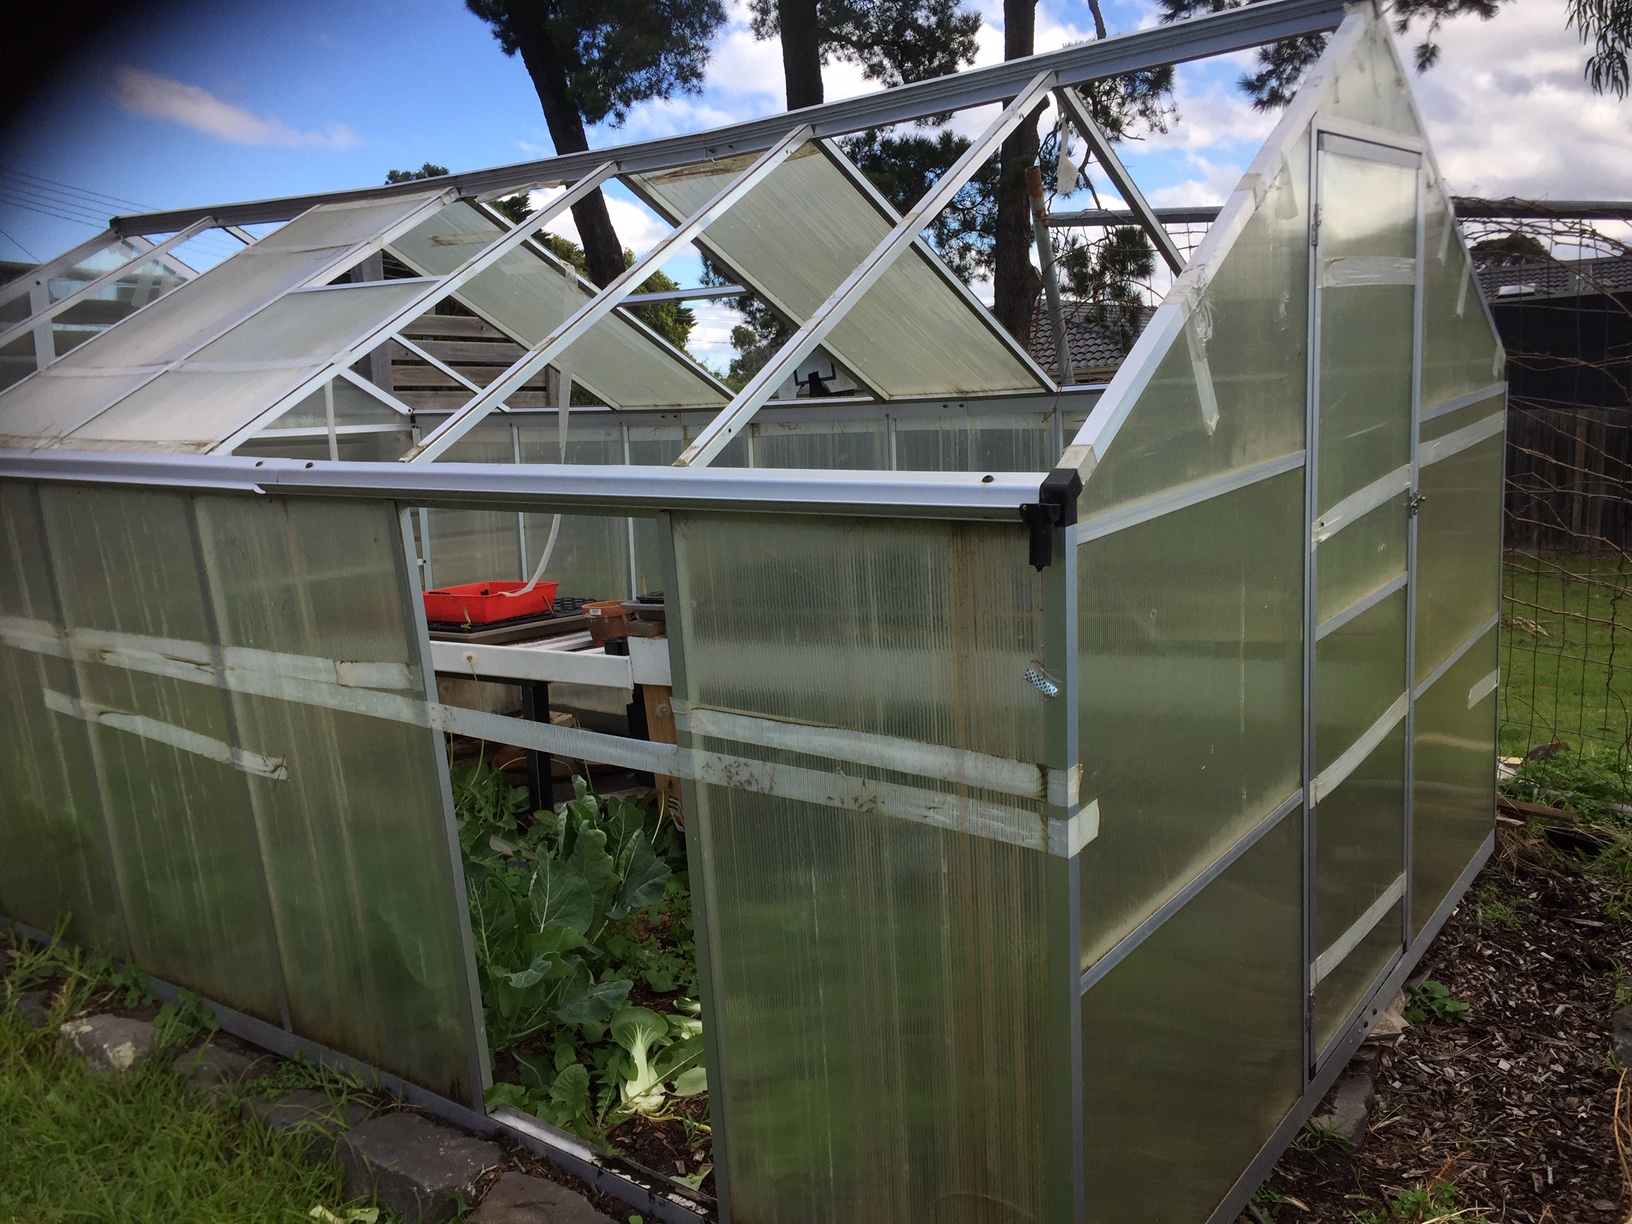 How Do You Keep Greenhouse Panels From Blowing Out?